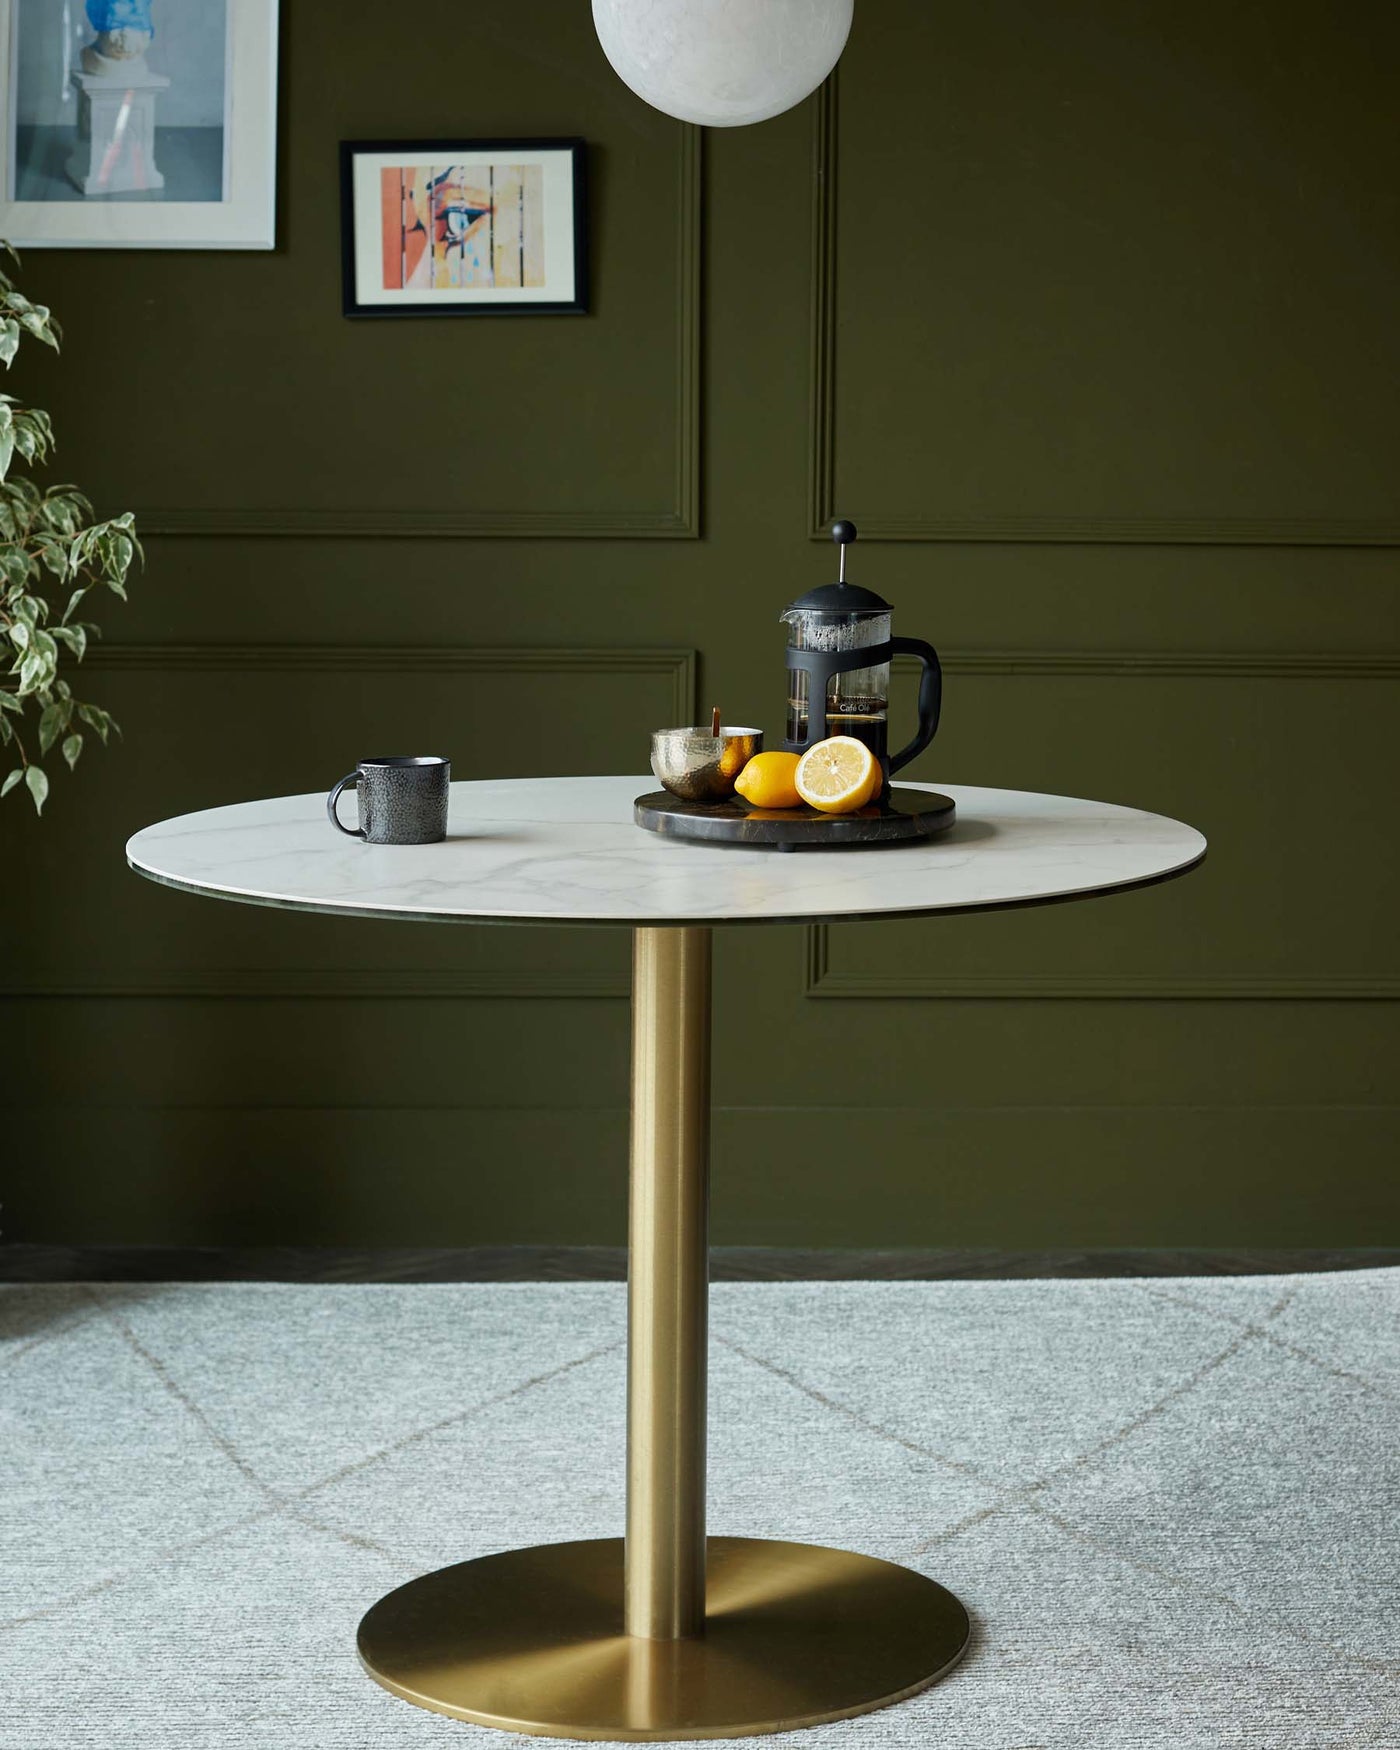 Romeo White Marbled Ceramic and Brass Pedestal 4 Seater Table